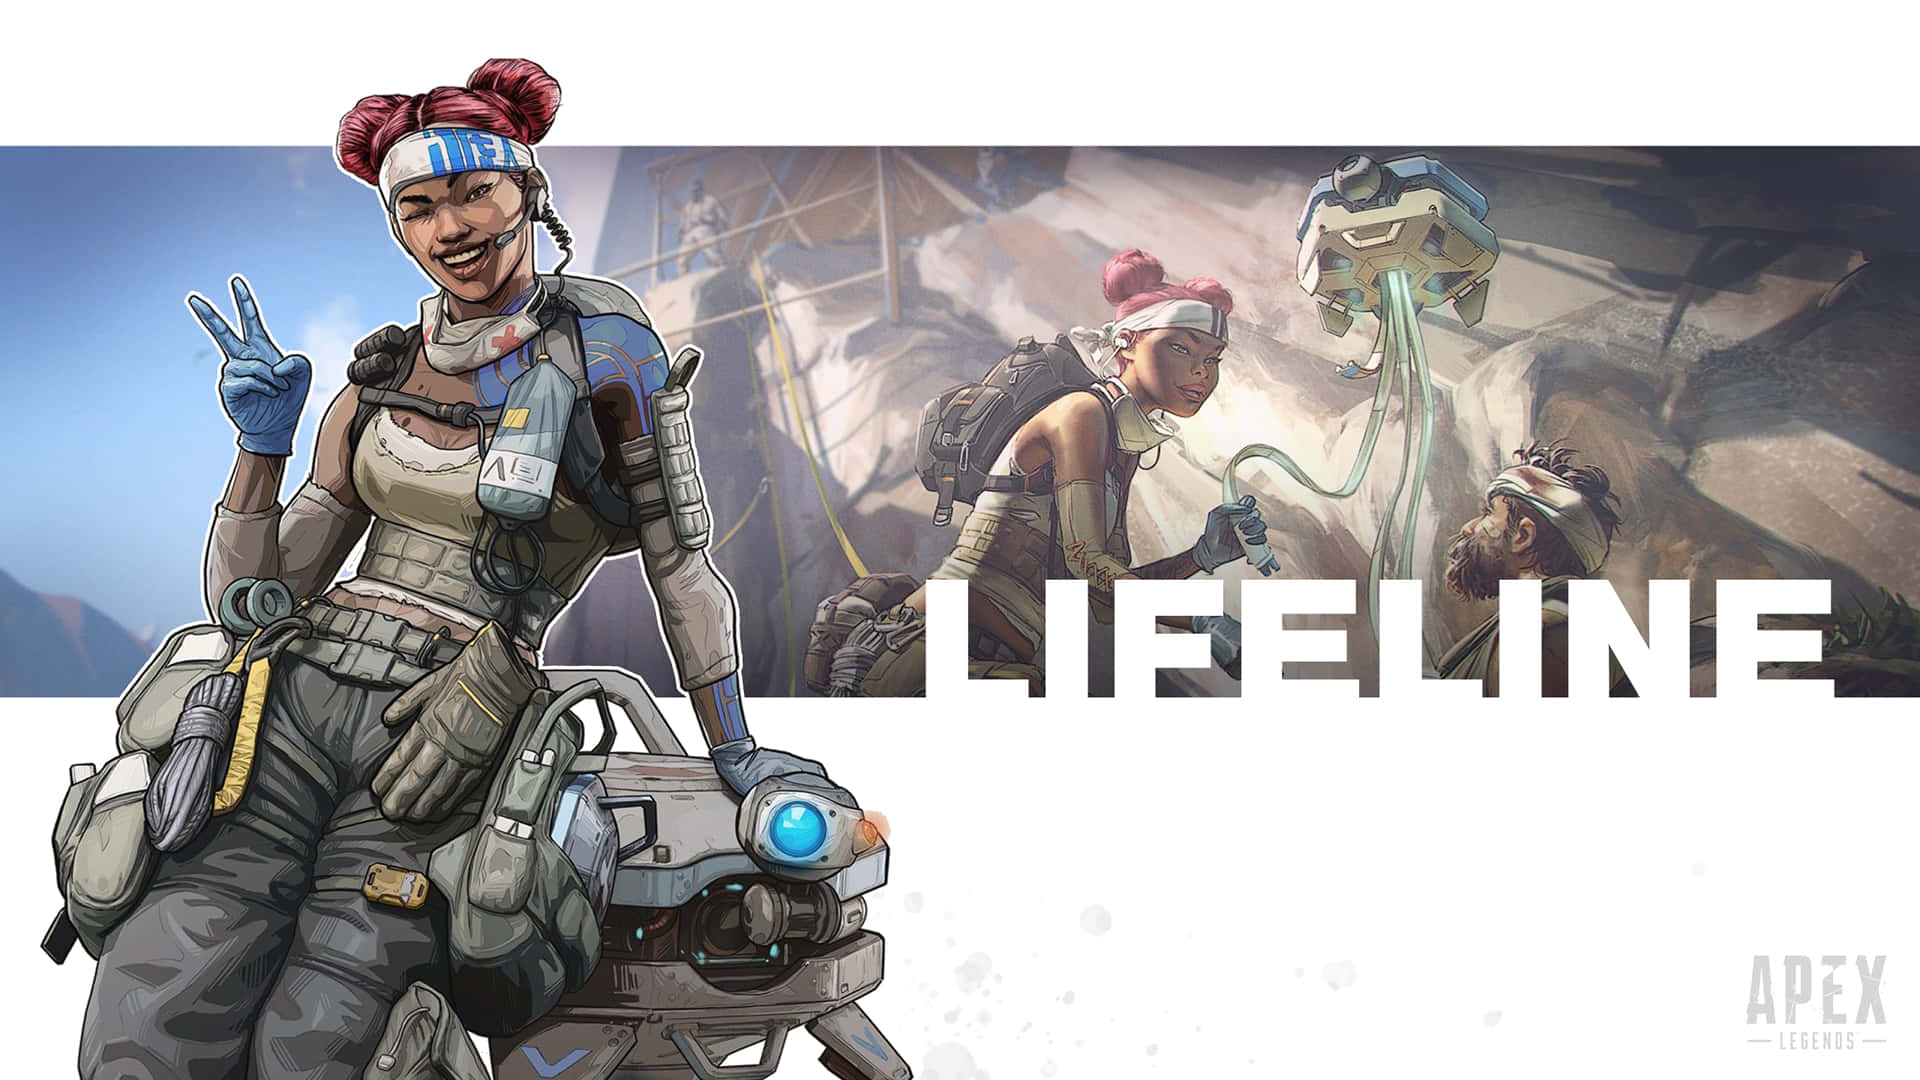 "Stay sharp! Lifeline is here to save the day in Apex Legends." Wallpaper